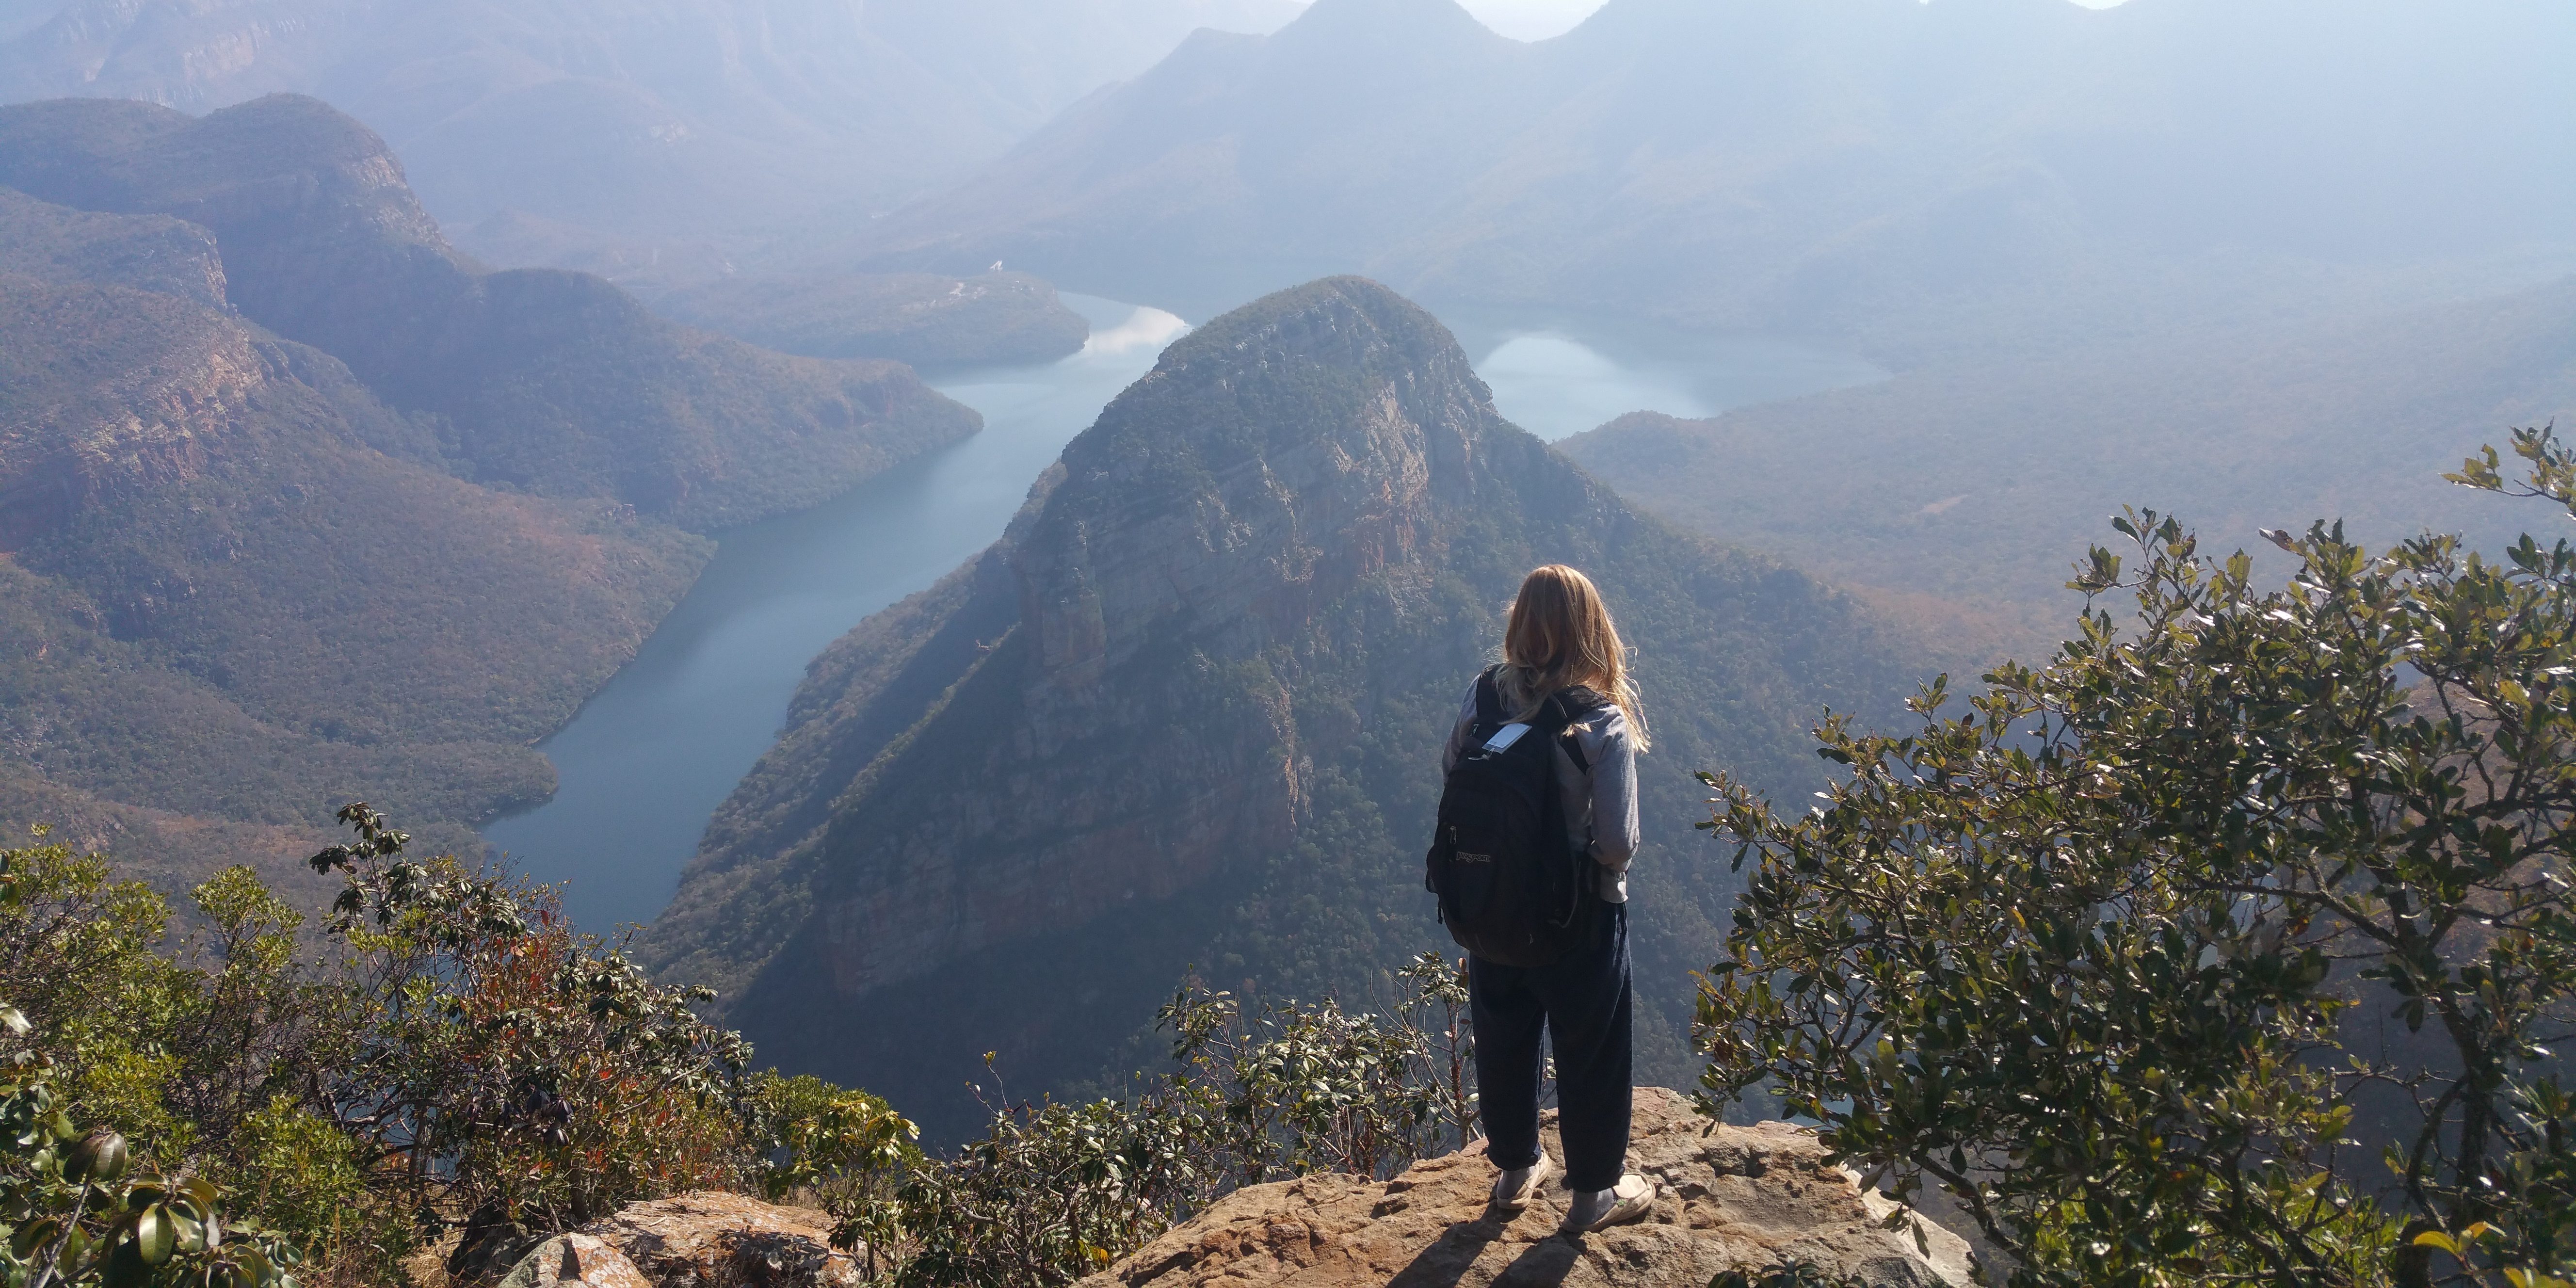 As part of efforts to become a global citizen, this GVI participant focuses on slow and mindful travel.